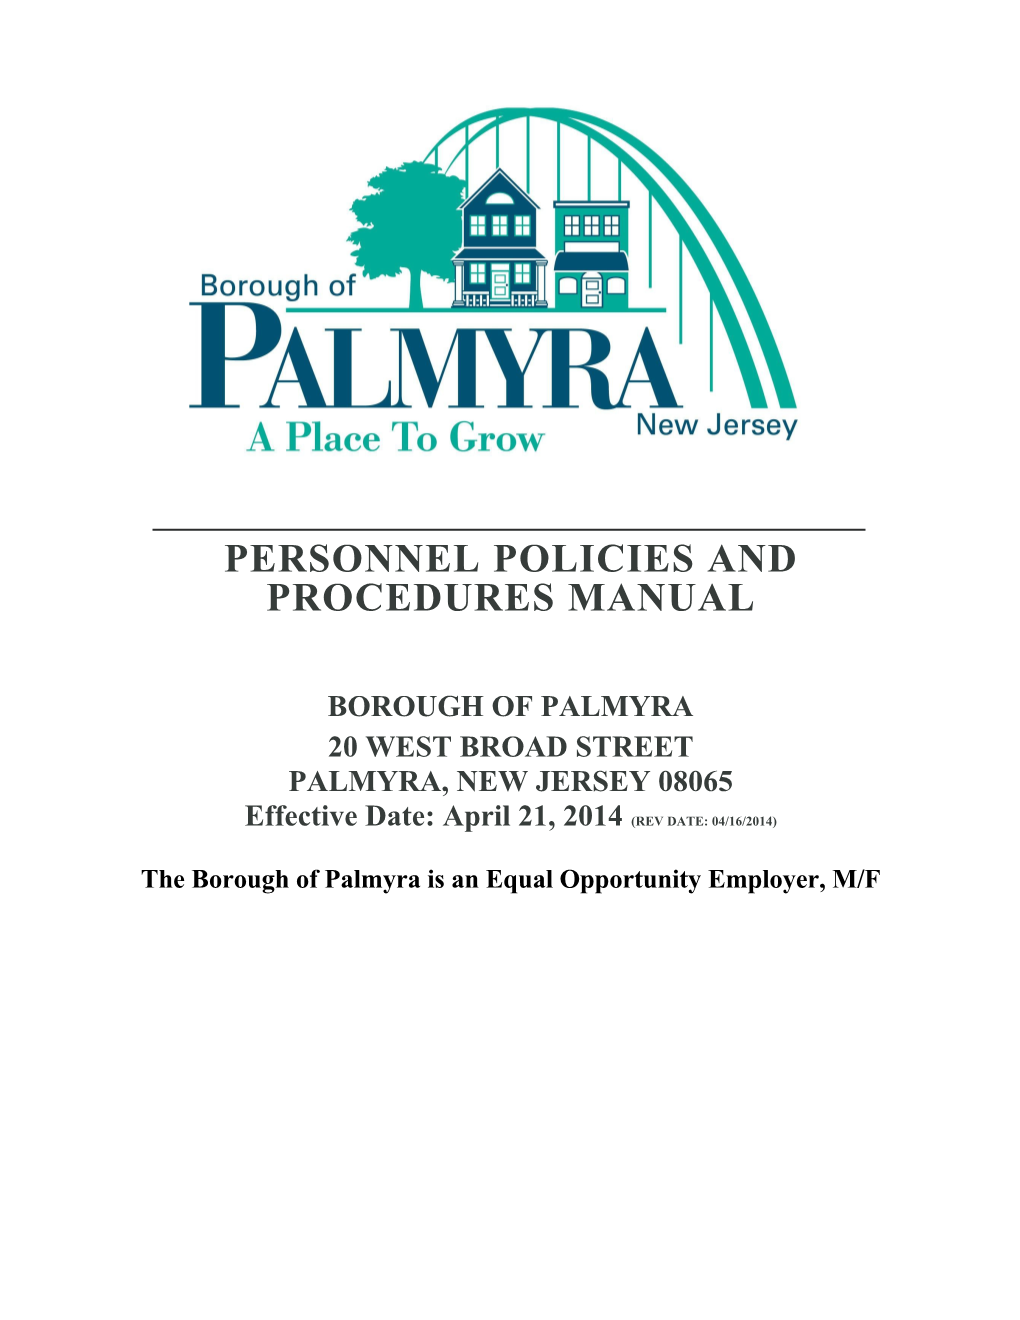 Personnel Policies and Procedures Manual